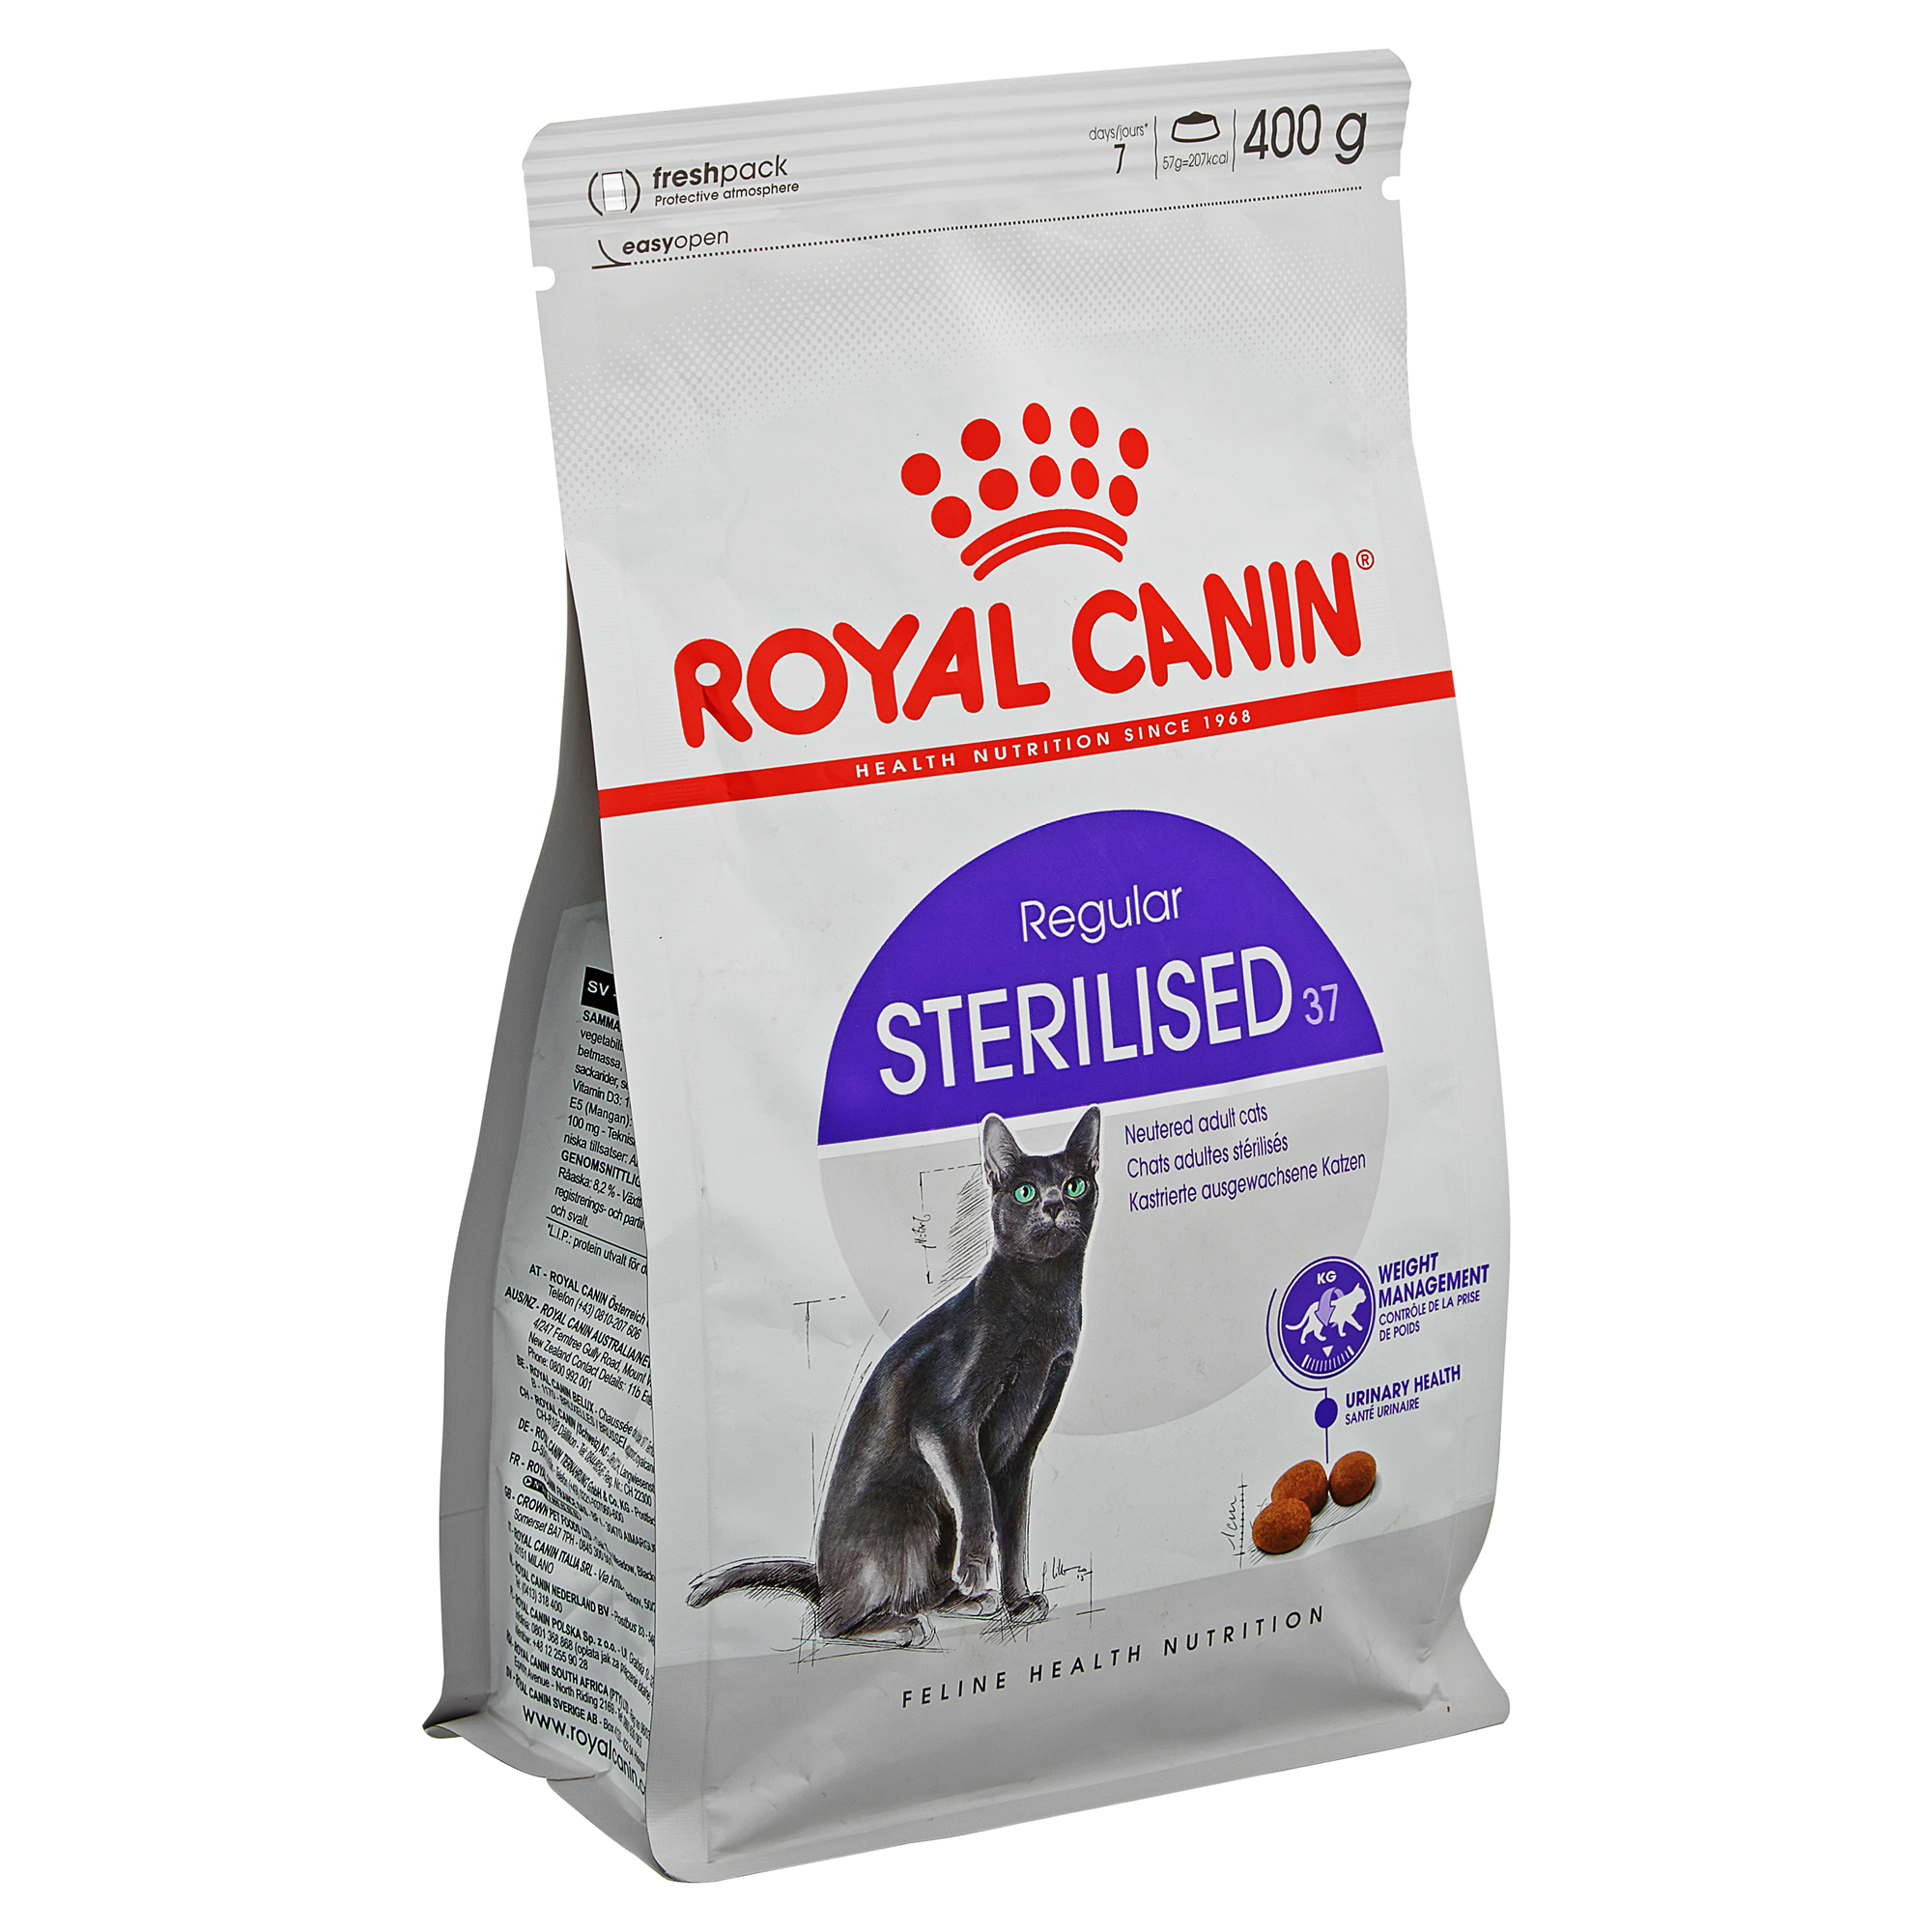 Les 500+ meilleures royal canin chat sterilised 37 644064Royal canin